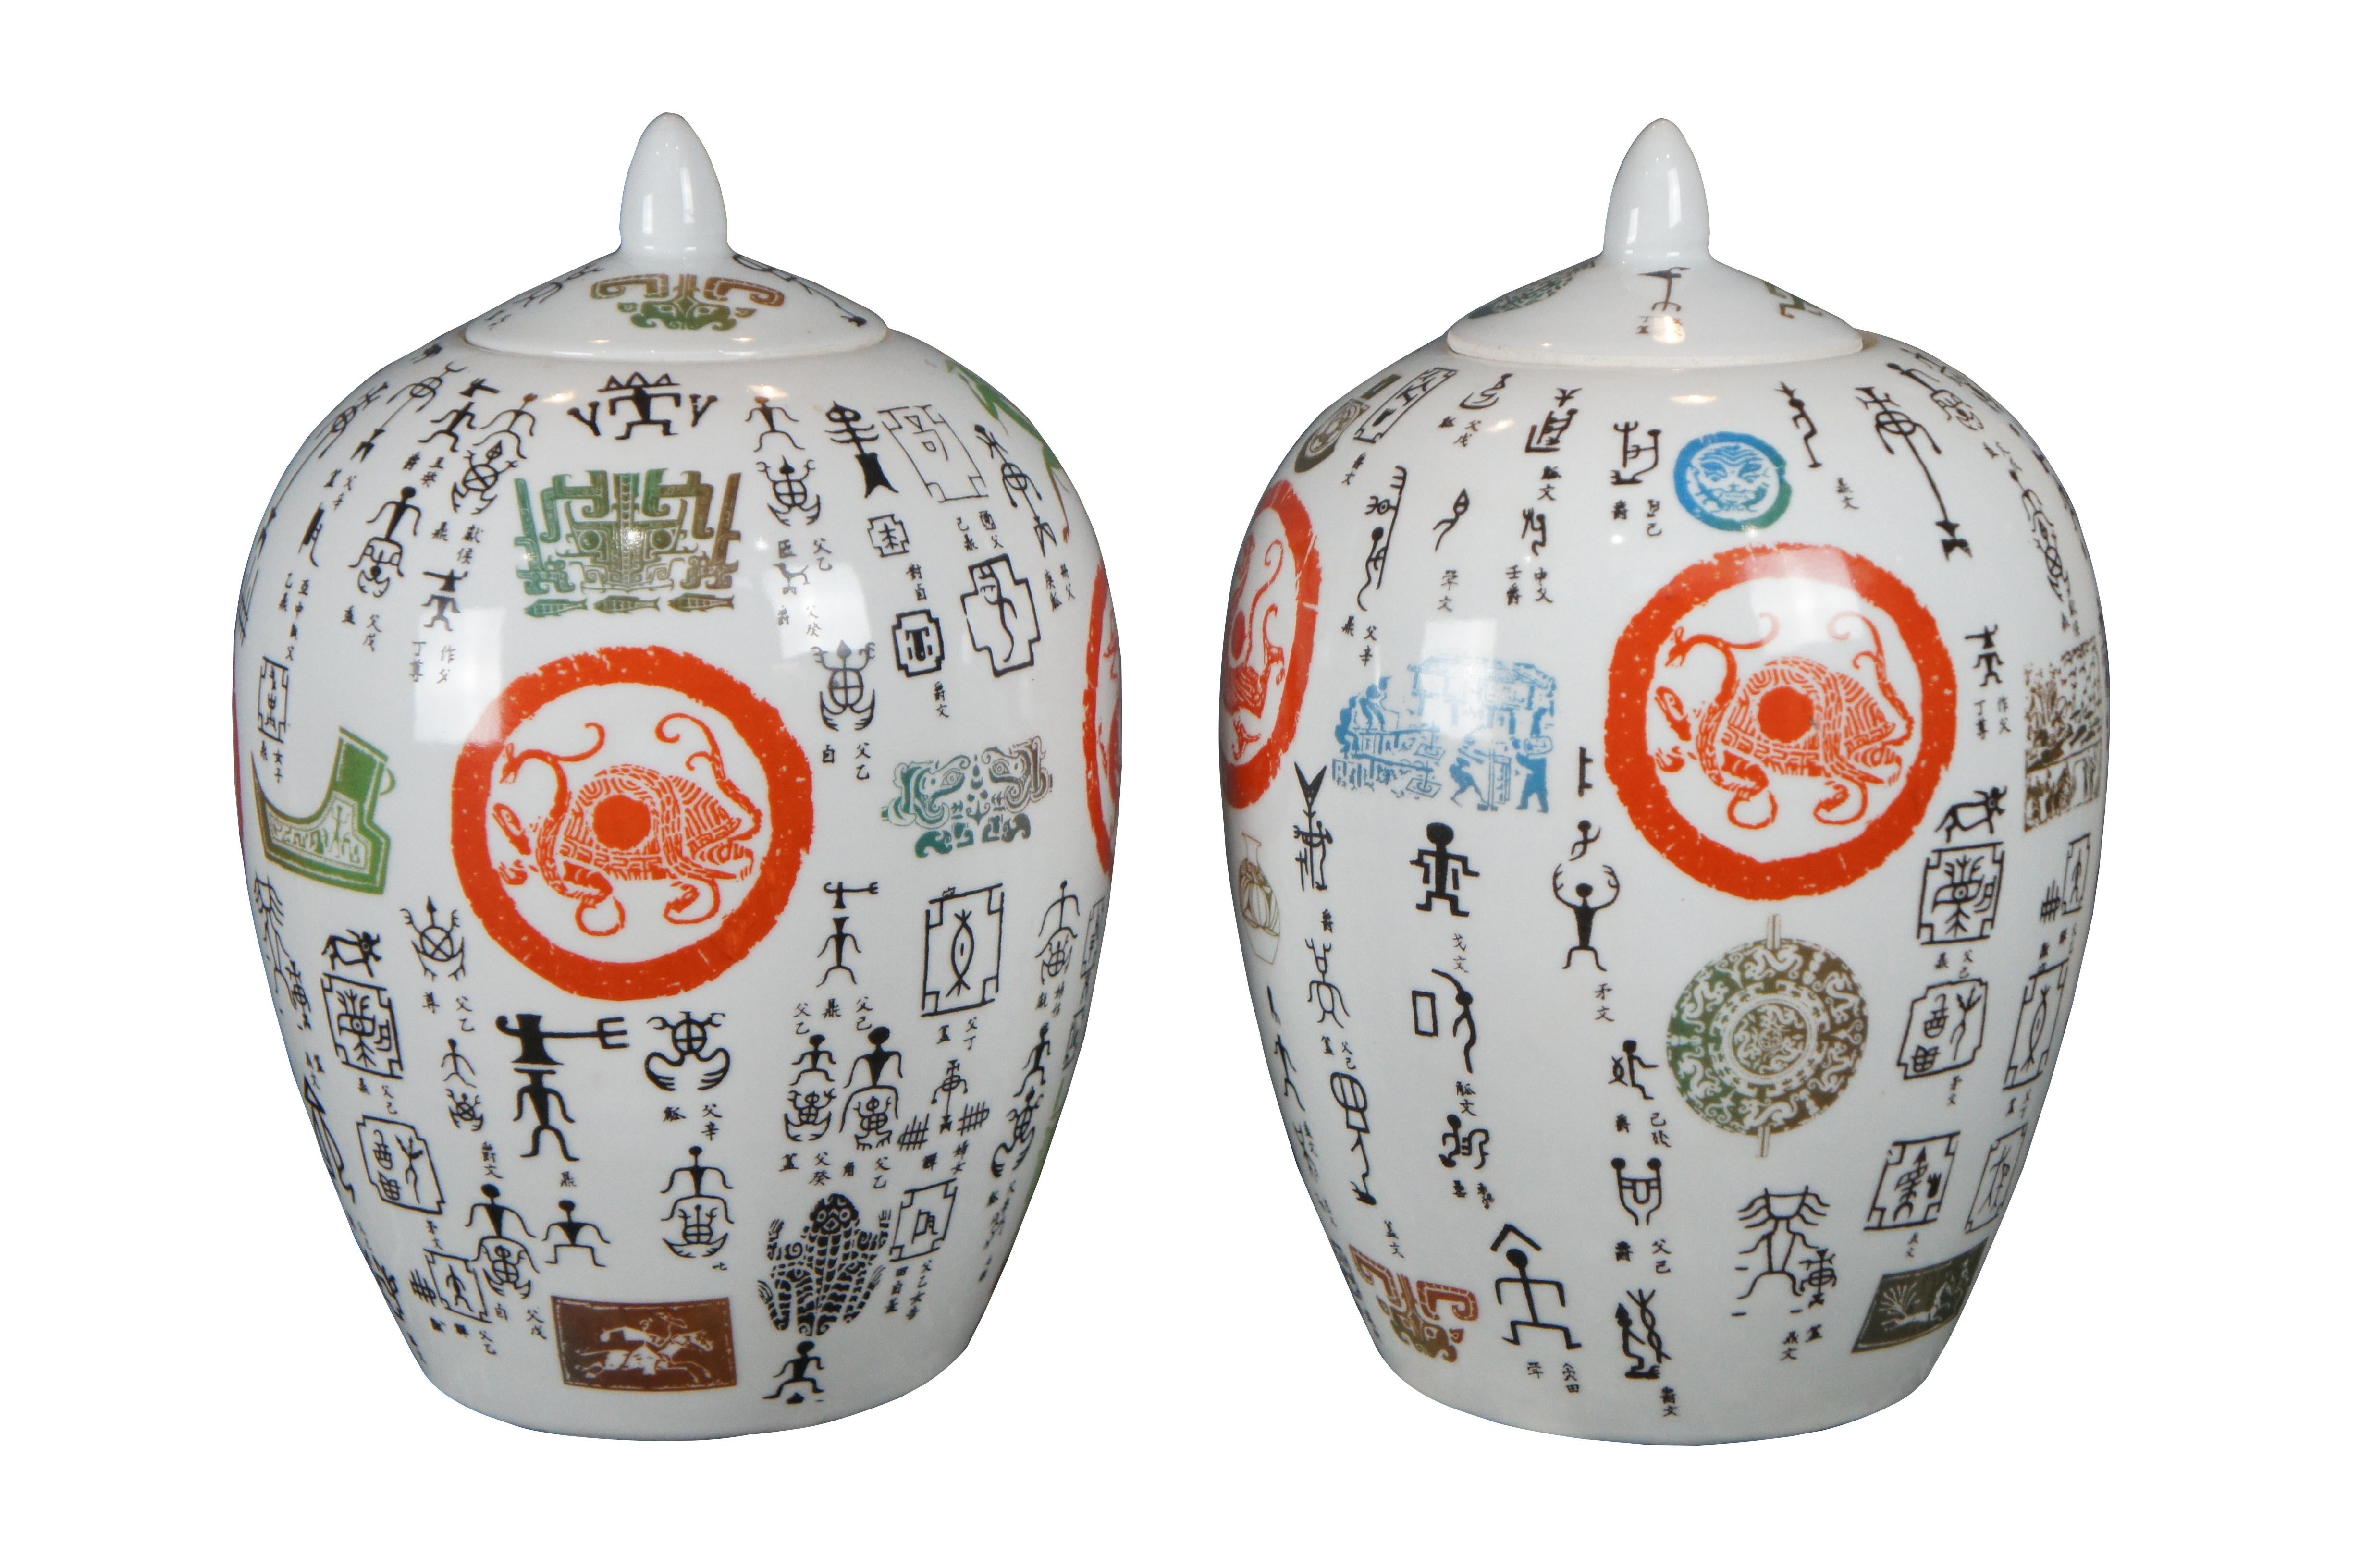 Pair of Chinese Famille Rose ginger jars. Made from porcelain with a uniquely finished exterior featuring animals and figures. The urn has a unique melting pot vibe drawing together motifs from Mesoamerica and Egypt.

Dimensions:
8.5